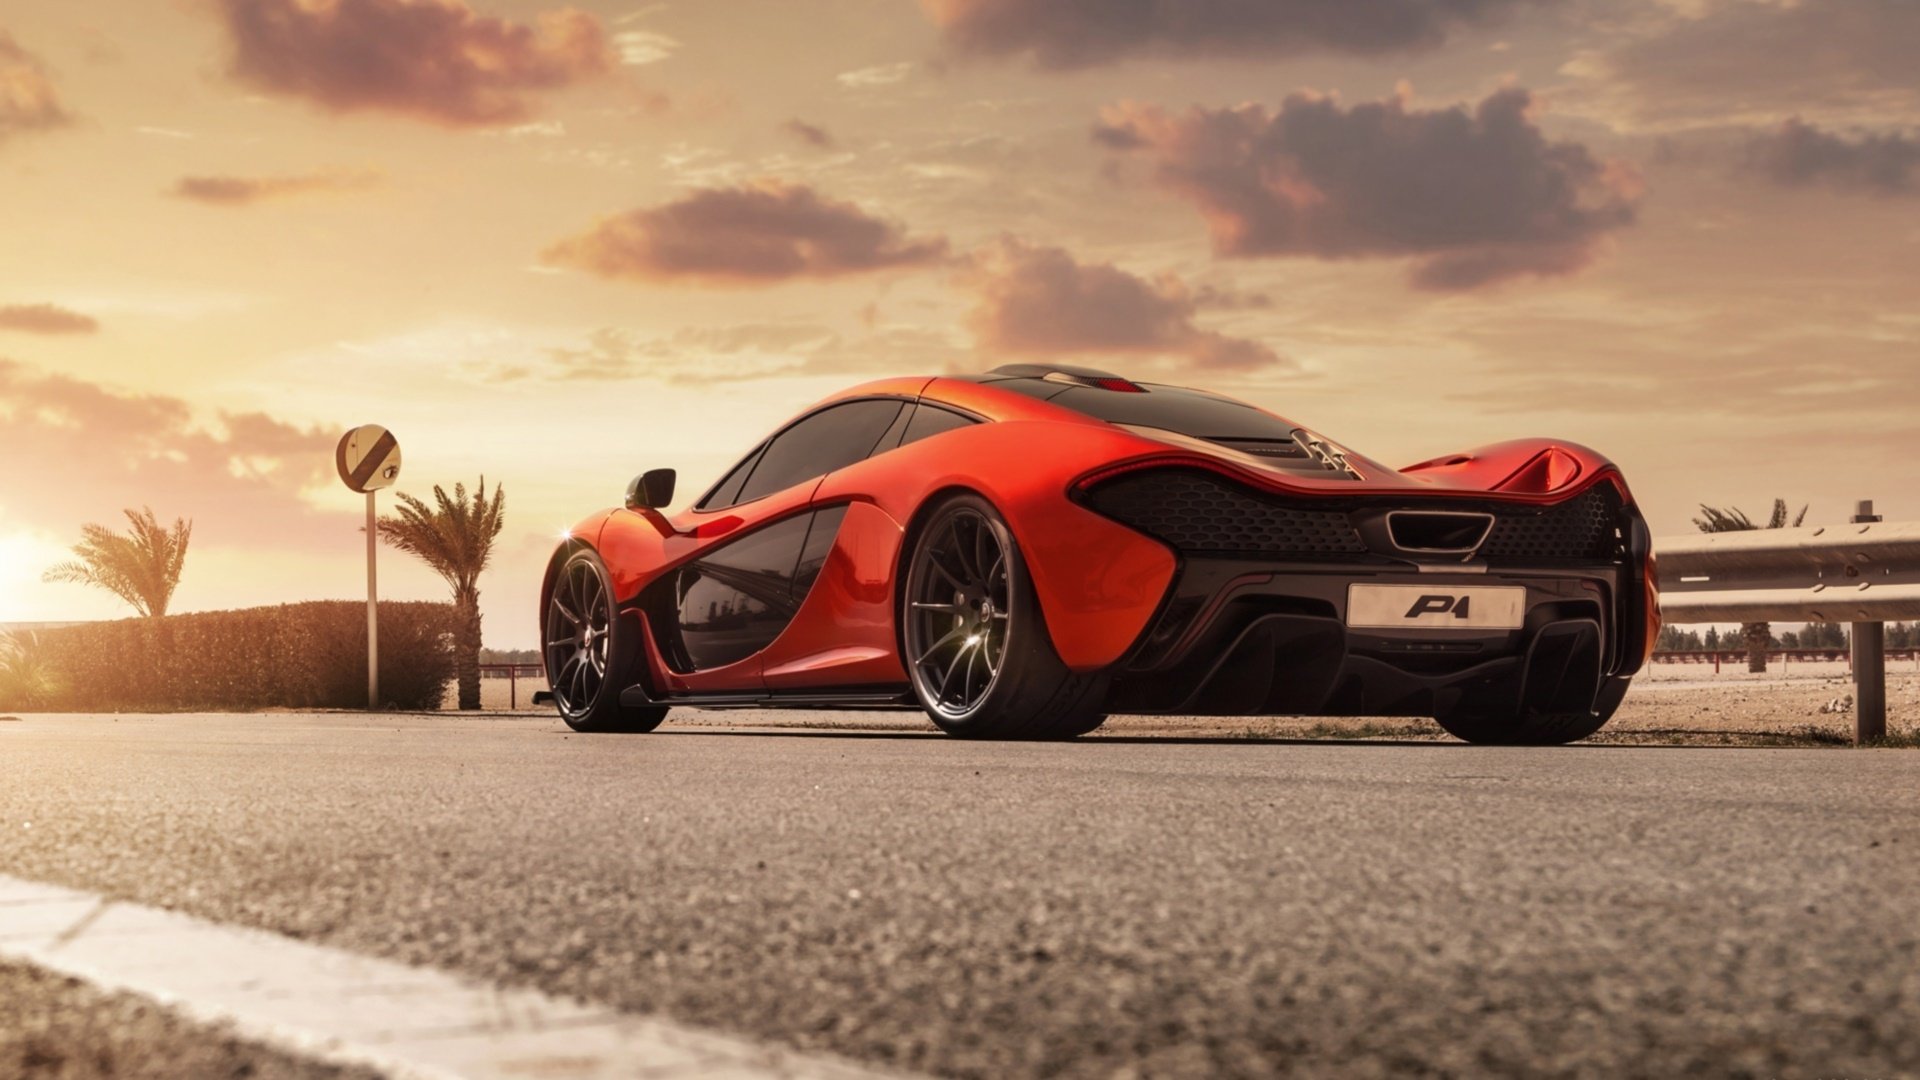 McLaren P1 Full HD Wallpaper and Background Image | 1920x1080 | ID:494628